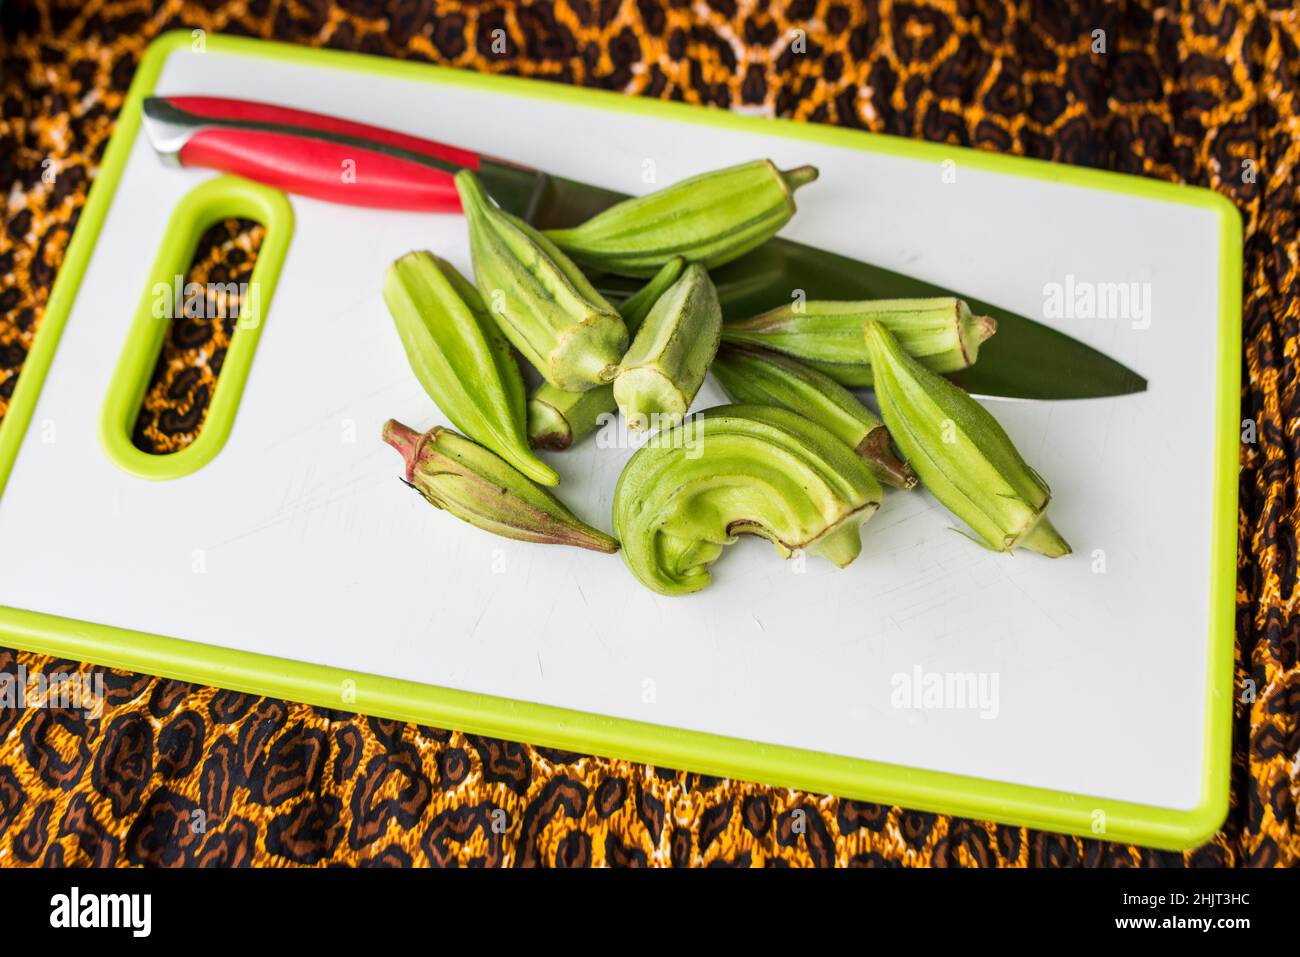 freshly harvested okra on cutting board with knife Stock Photo